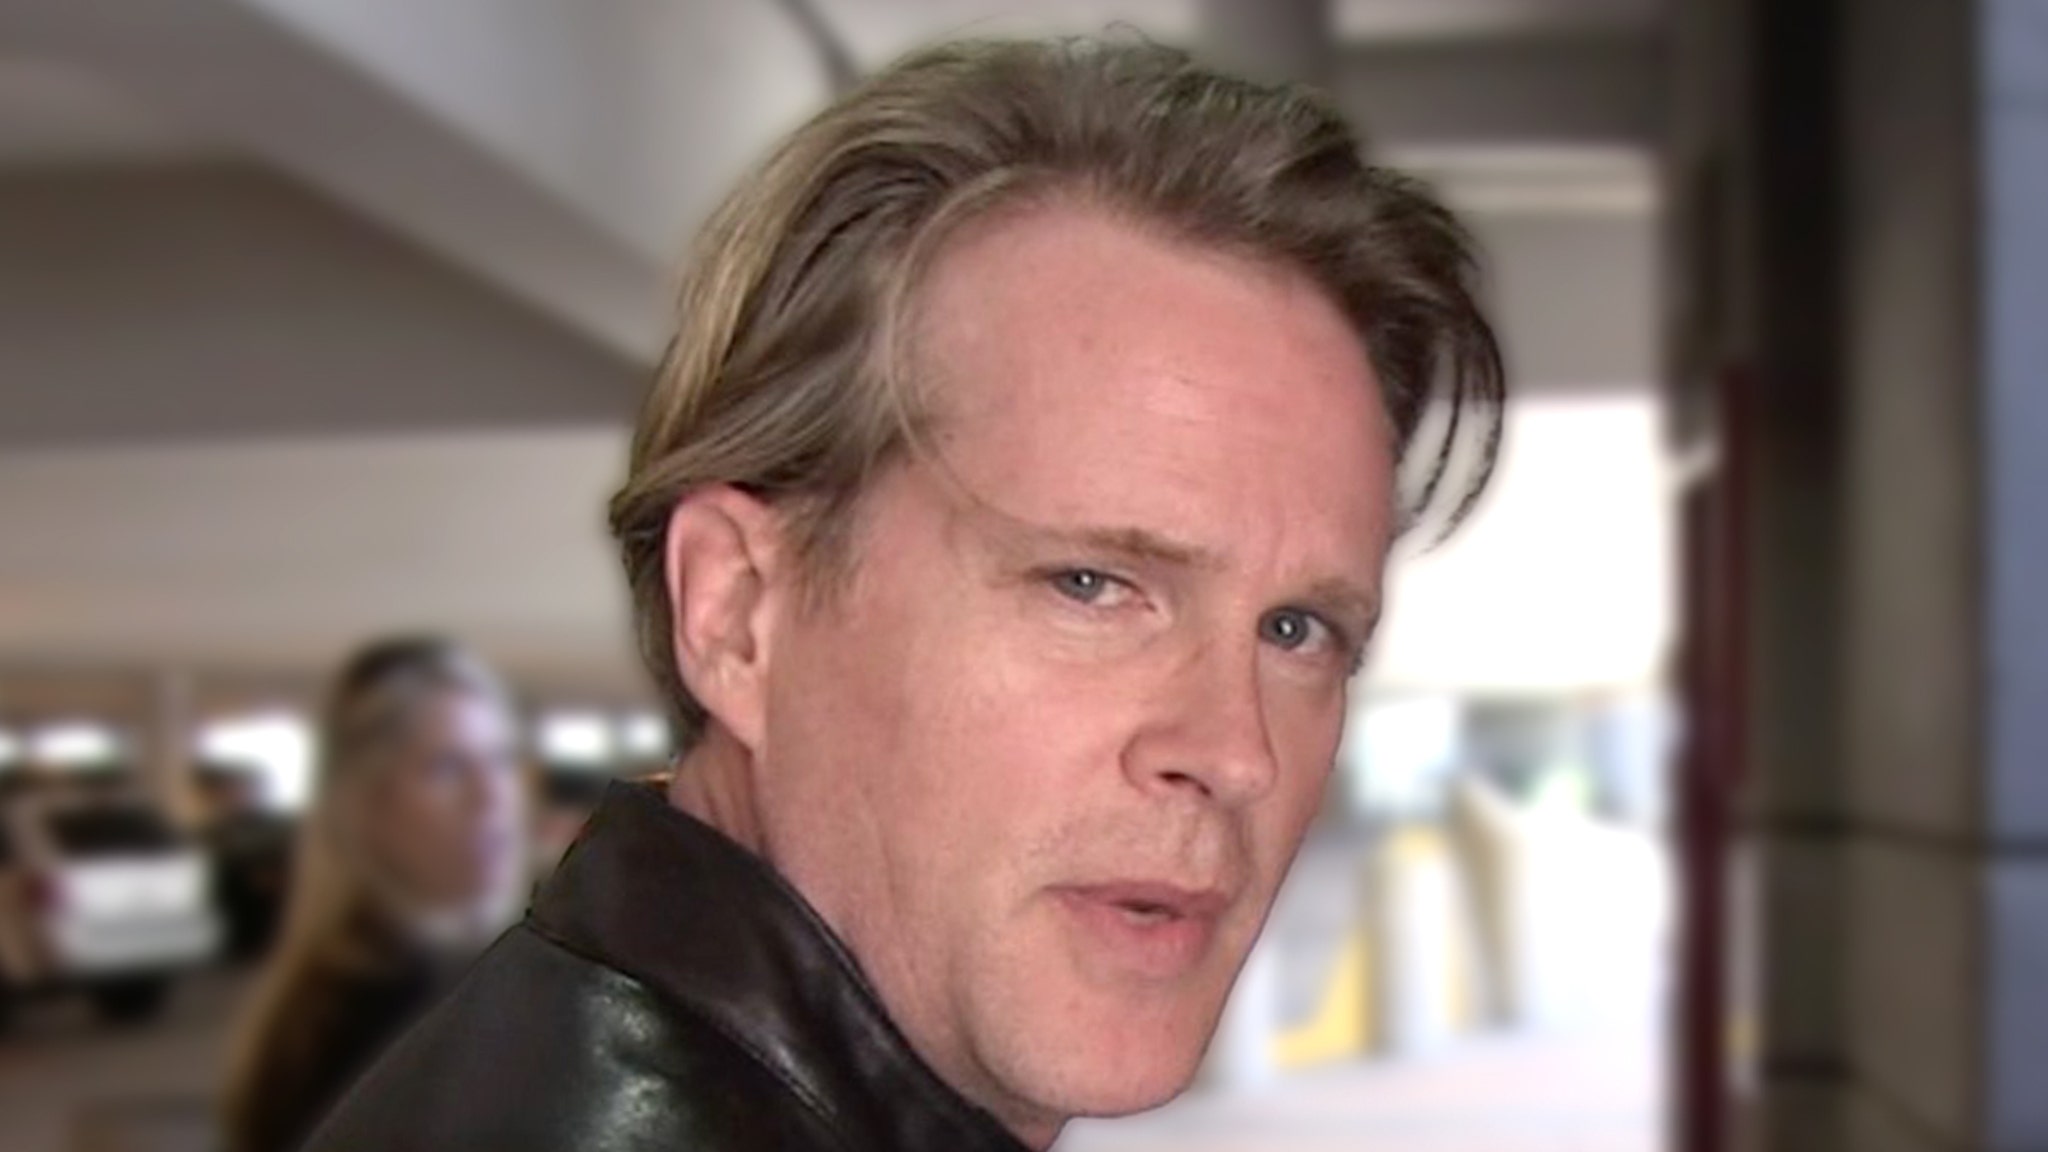 ‘Princess Bride’ Star Cary Elwes Had $100k in Valuables Stolen From Home